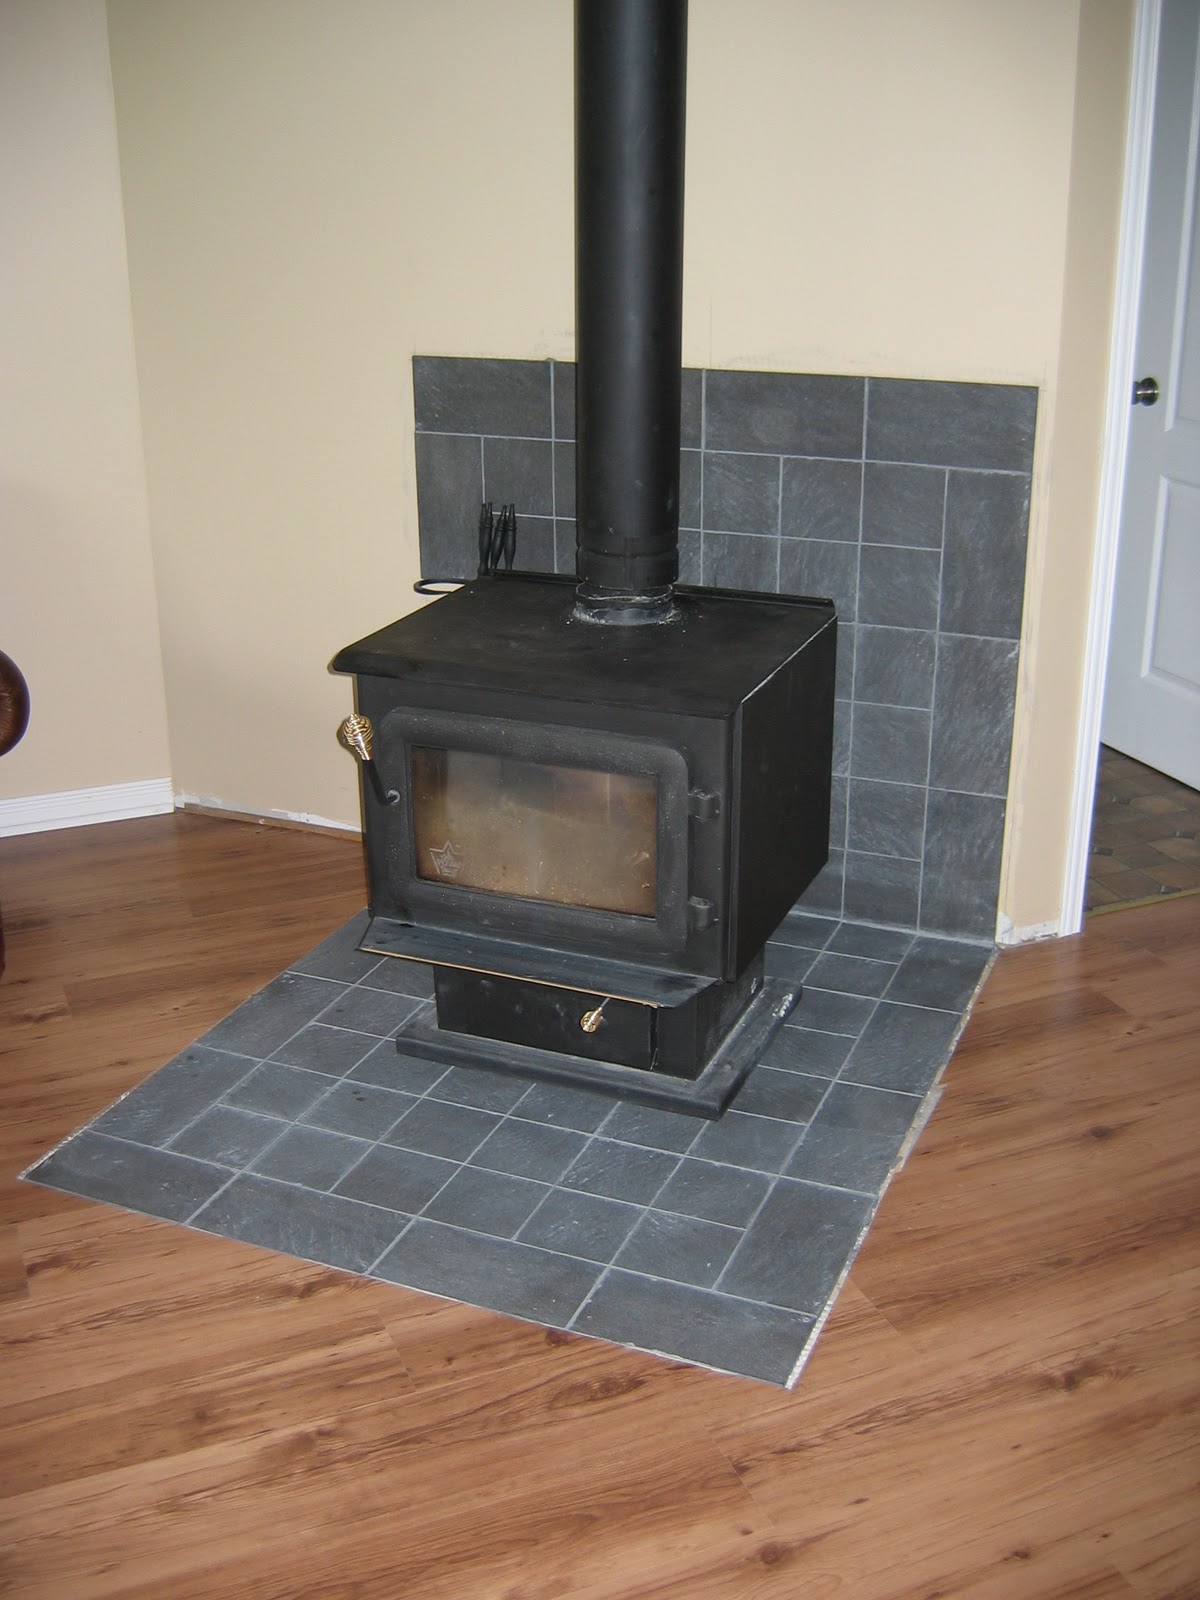 Cottage on the Edge - For Rent: Heat Shield for the WoodStove: Completed